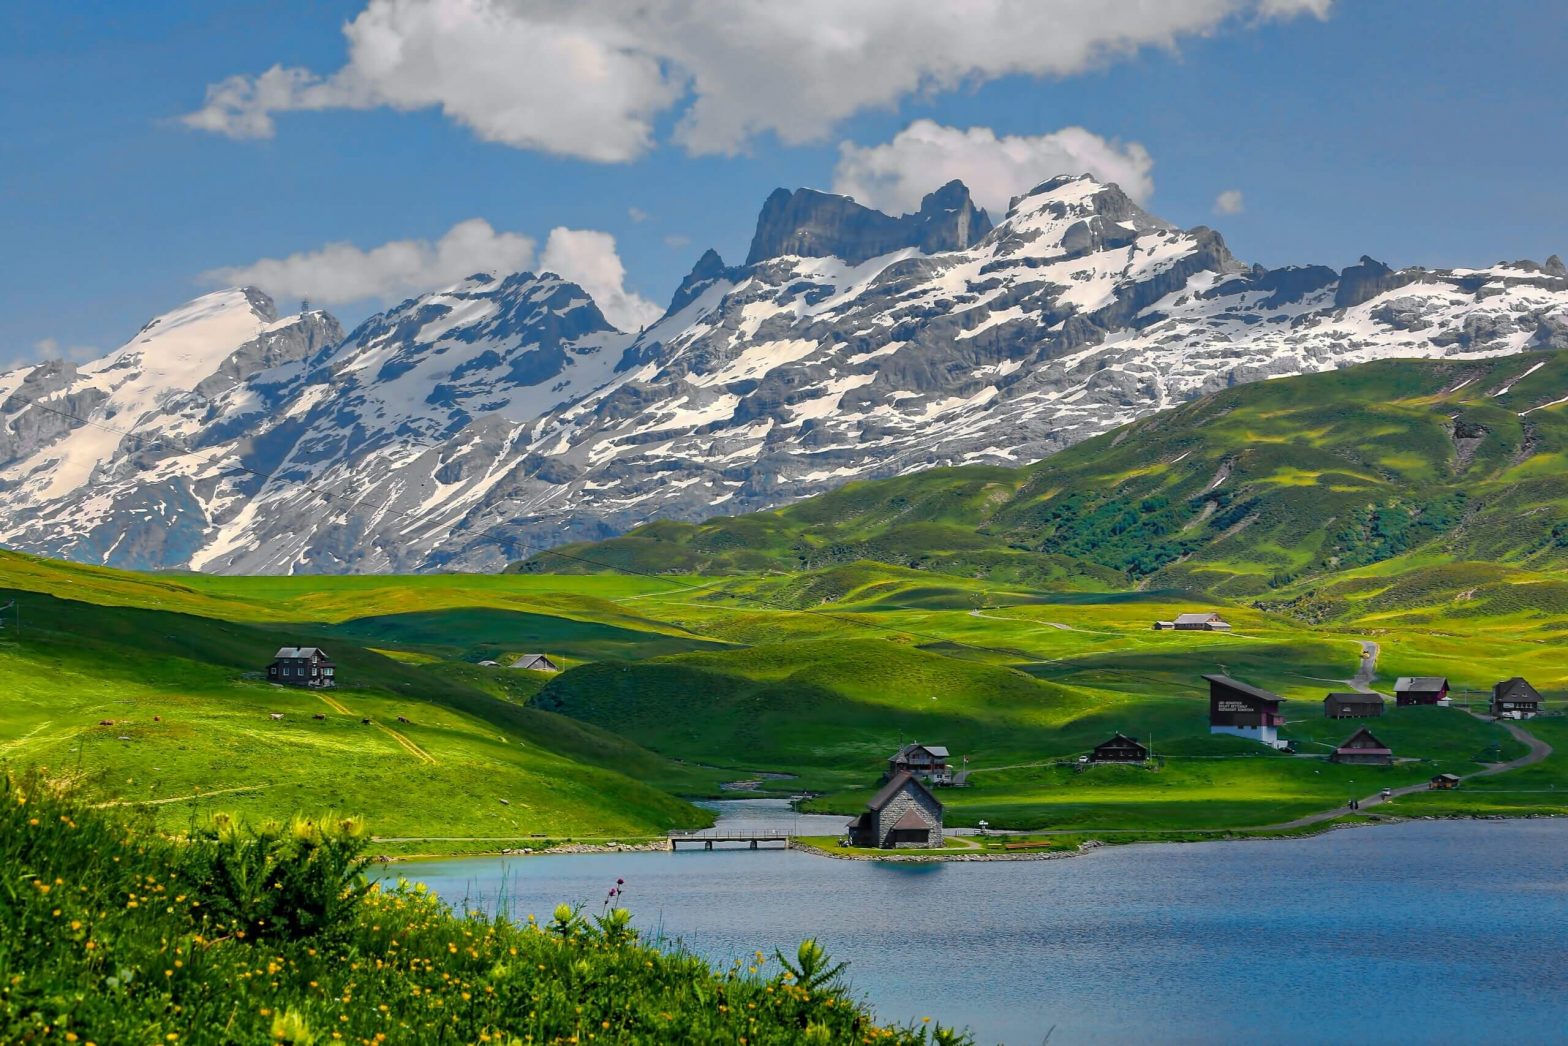 Snow covered mountains with green grass and blue water